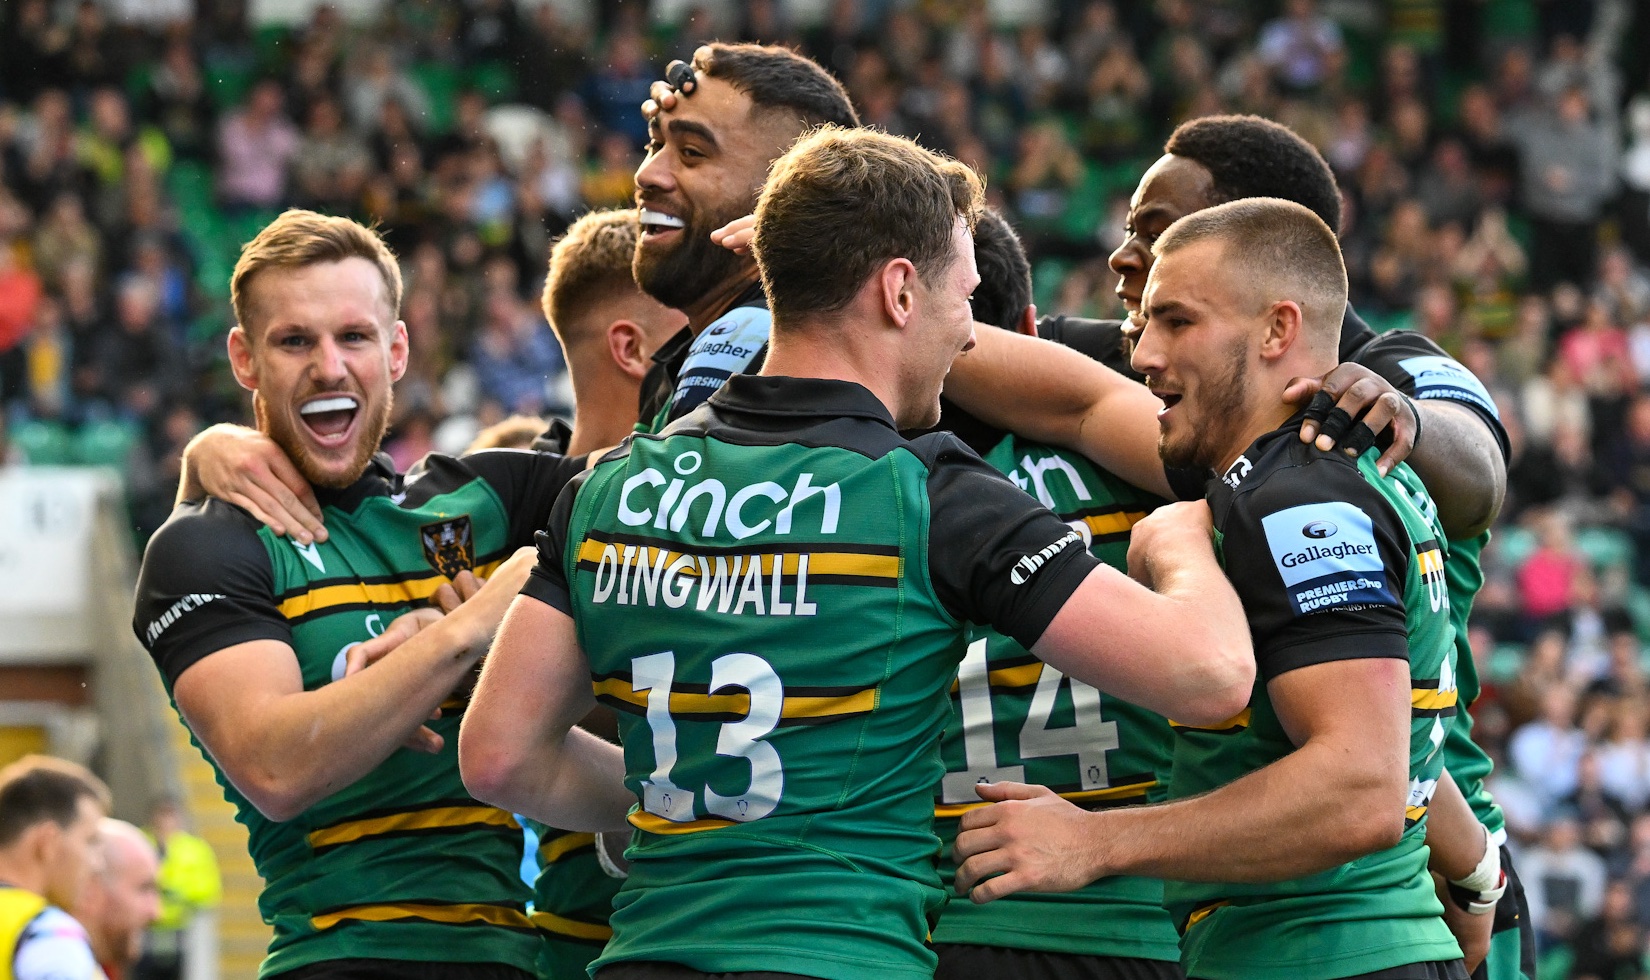 Gallagher Premiership Round 9 betting preview The Rugby Tipster